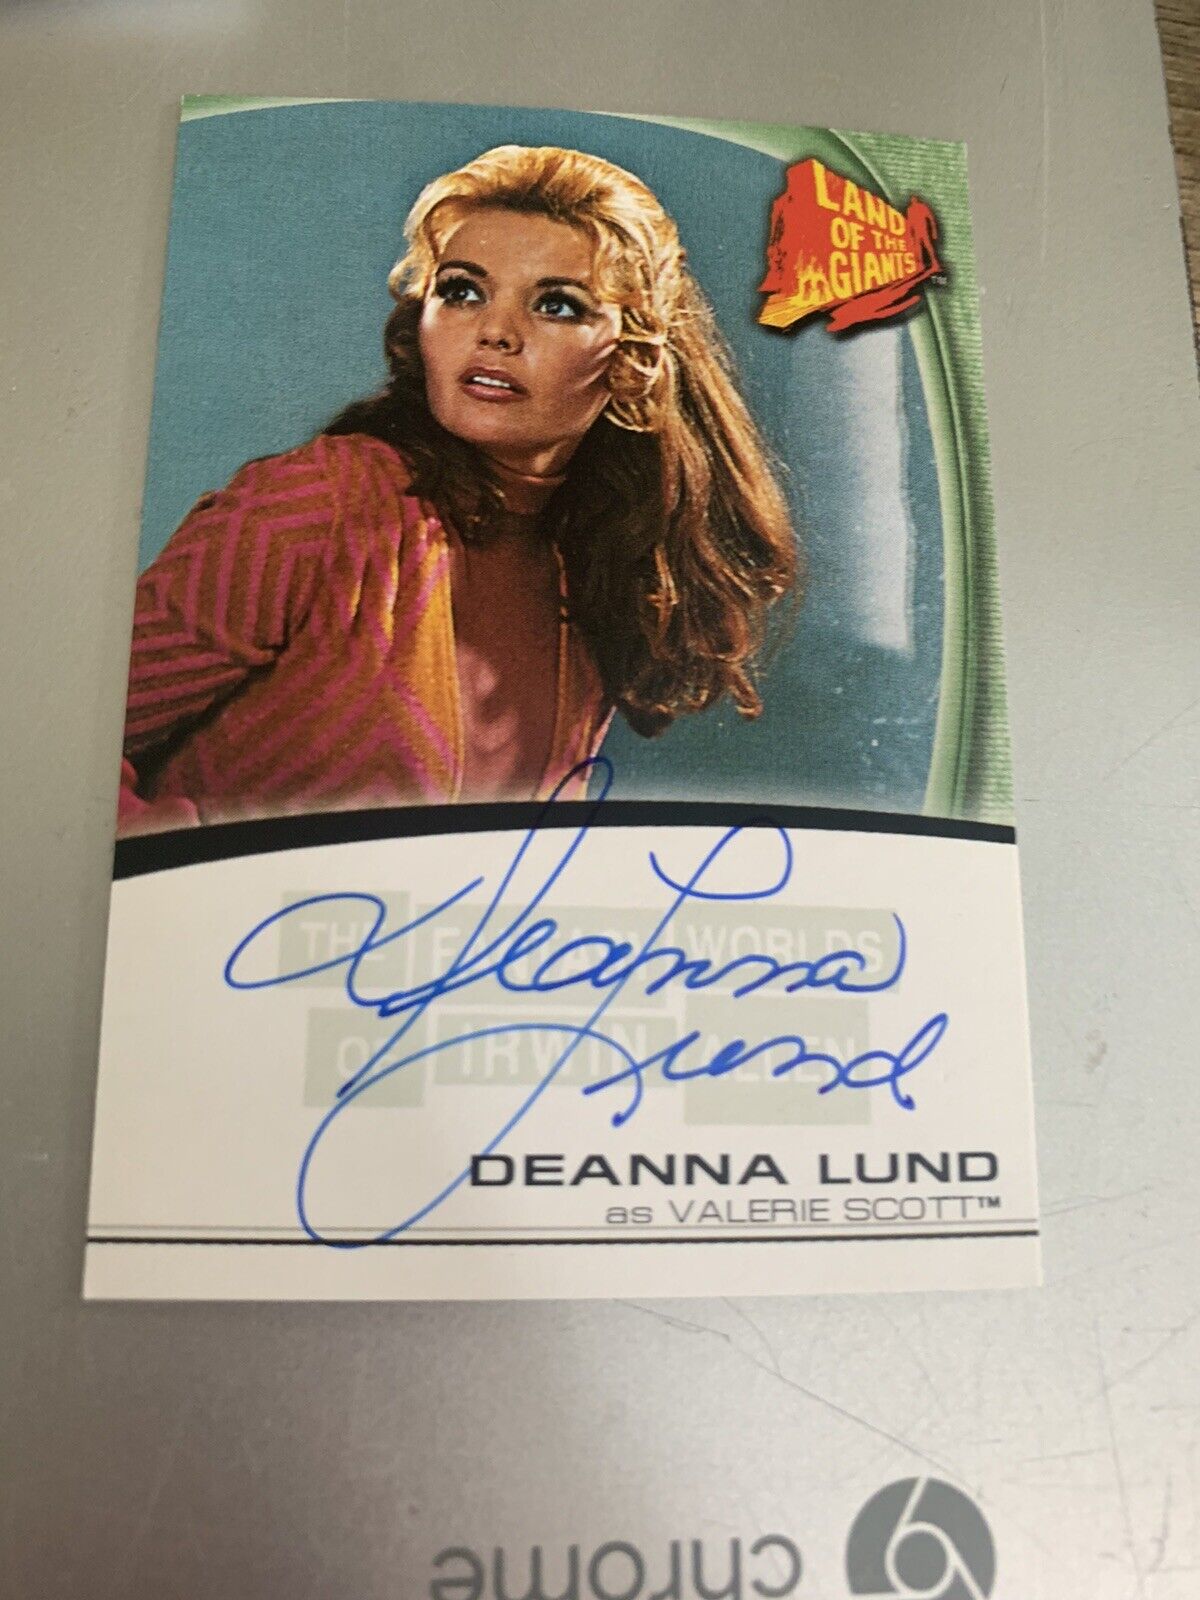 The Fantasy Worlds Irwin Allen Land of The Giants Deanna Lund Autograph Card A9